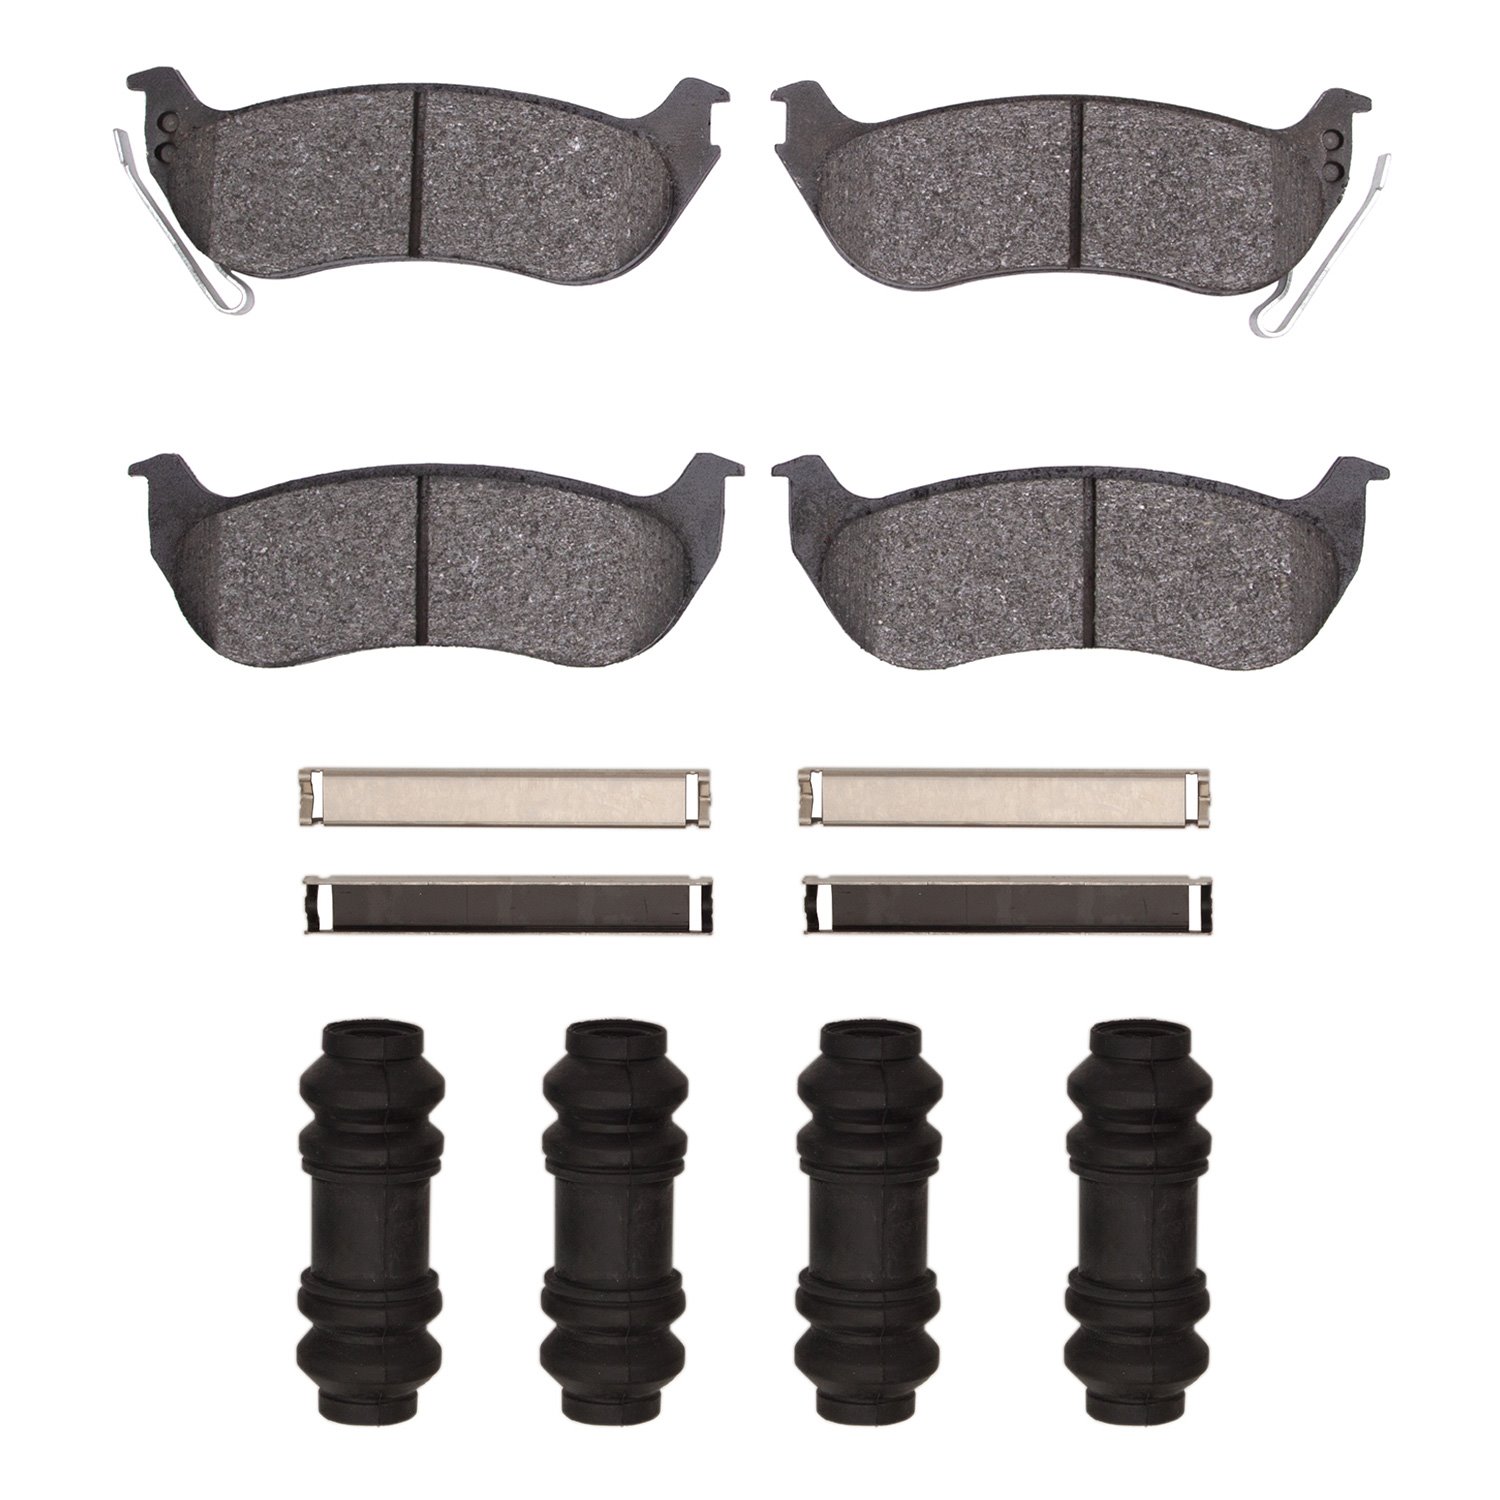 1400-0964-02 Ultimate-Duty Brake Pads & Hardware Kit, 2006-2010 Ford/Lincoln/Mercury/Mazda, Position: Rear